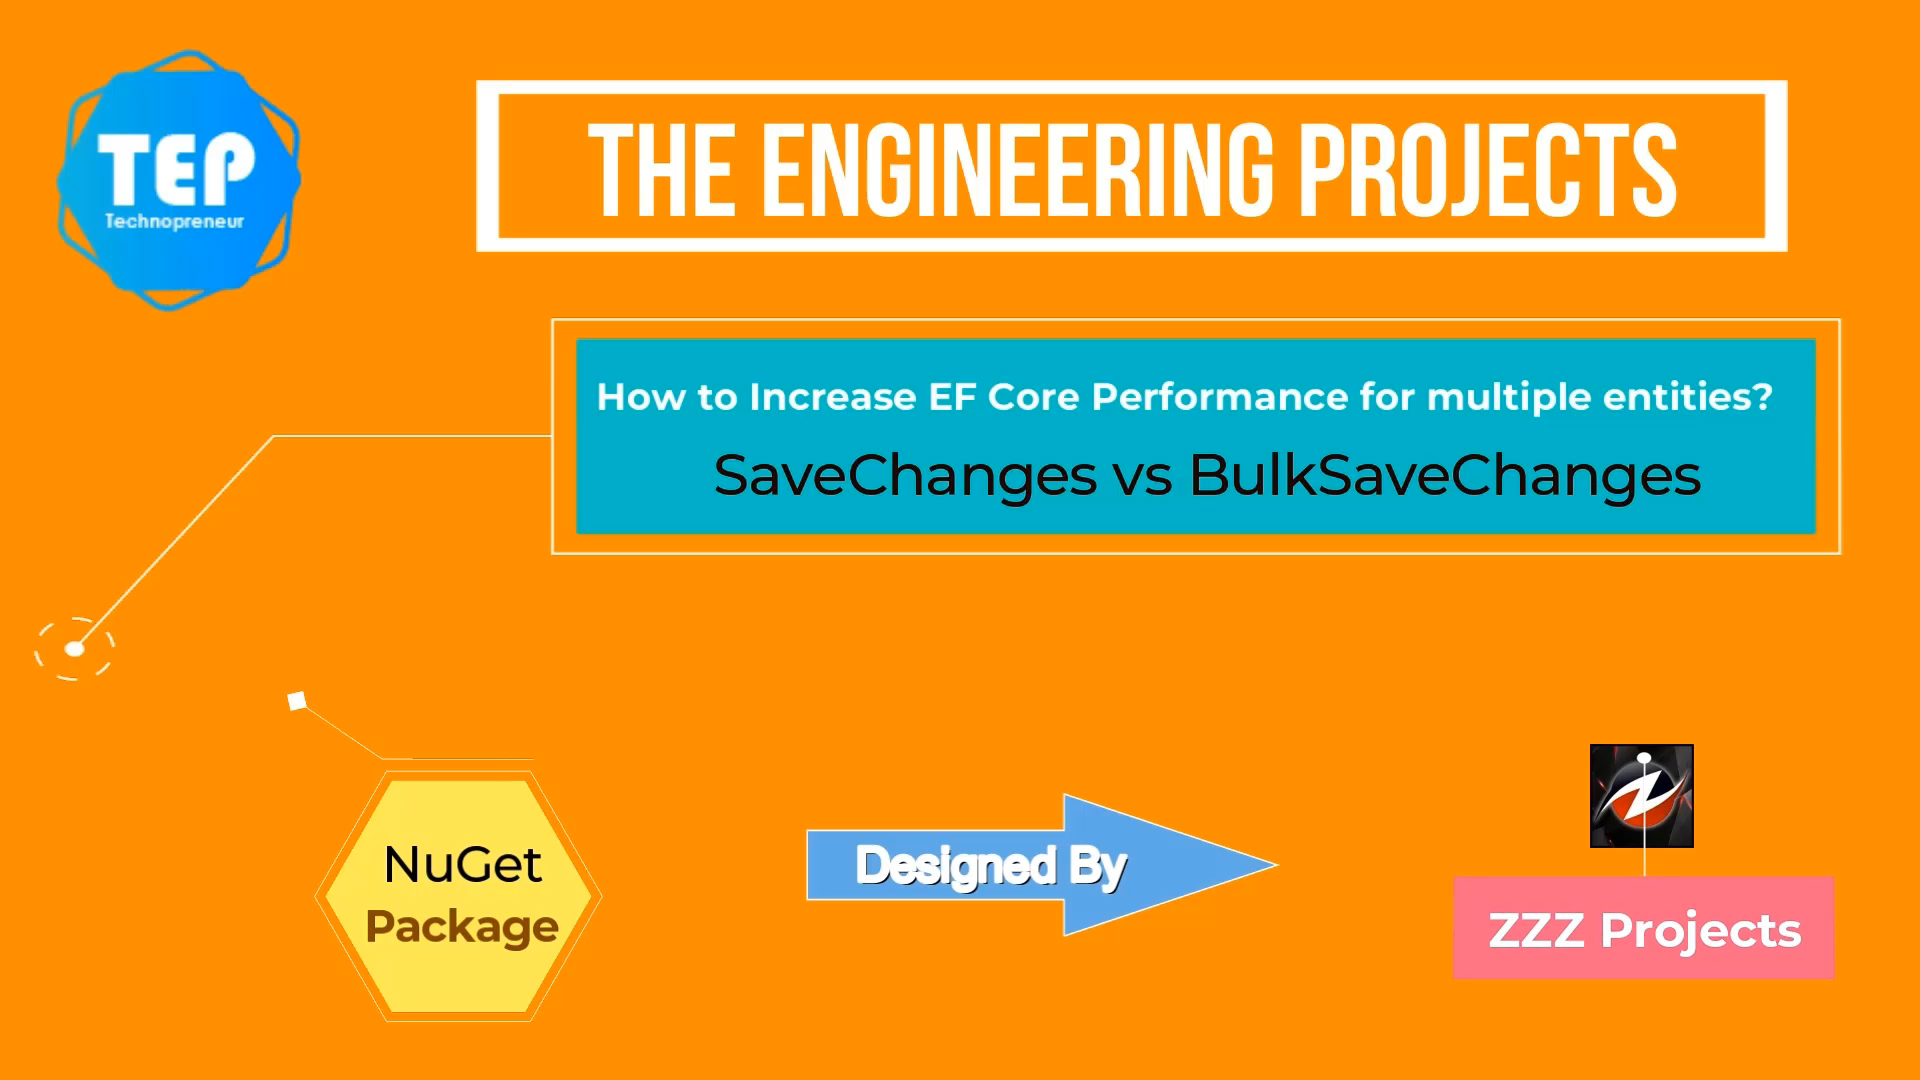 How to Increase EF Core Performance for Saving Multiple Entities, savechanges vs bulksavechanges, bulksavechanges method, bulksavechanges ef core, ef core multiple data, ef multiple entities